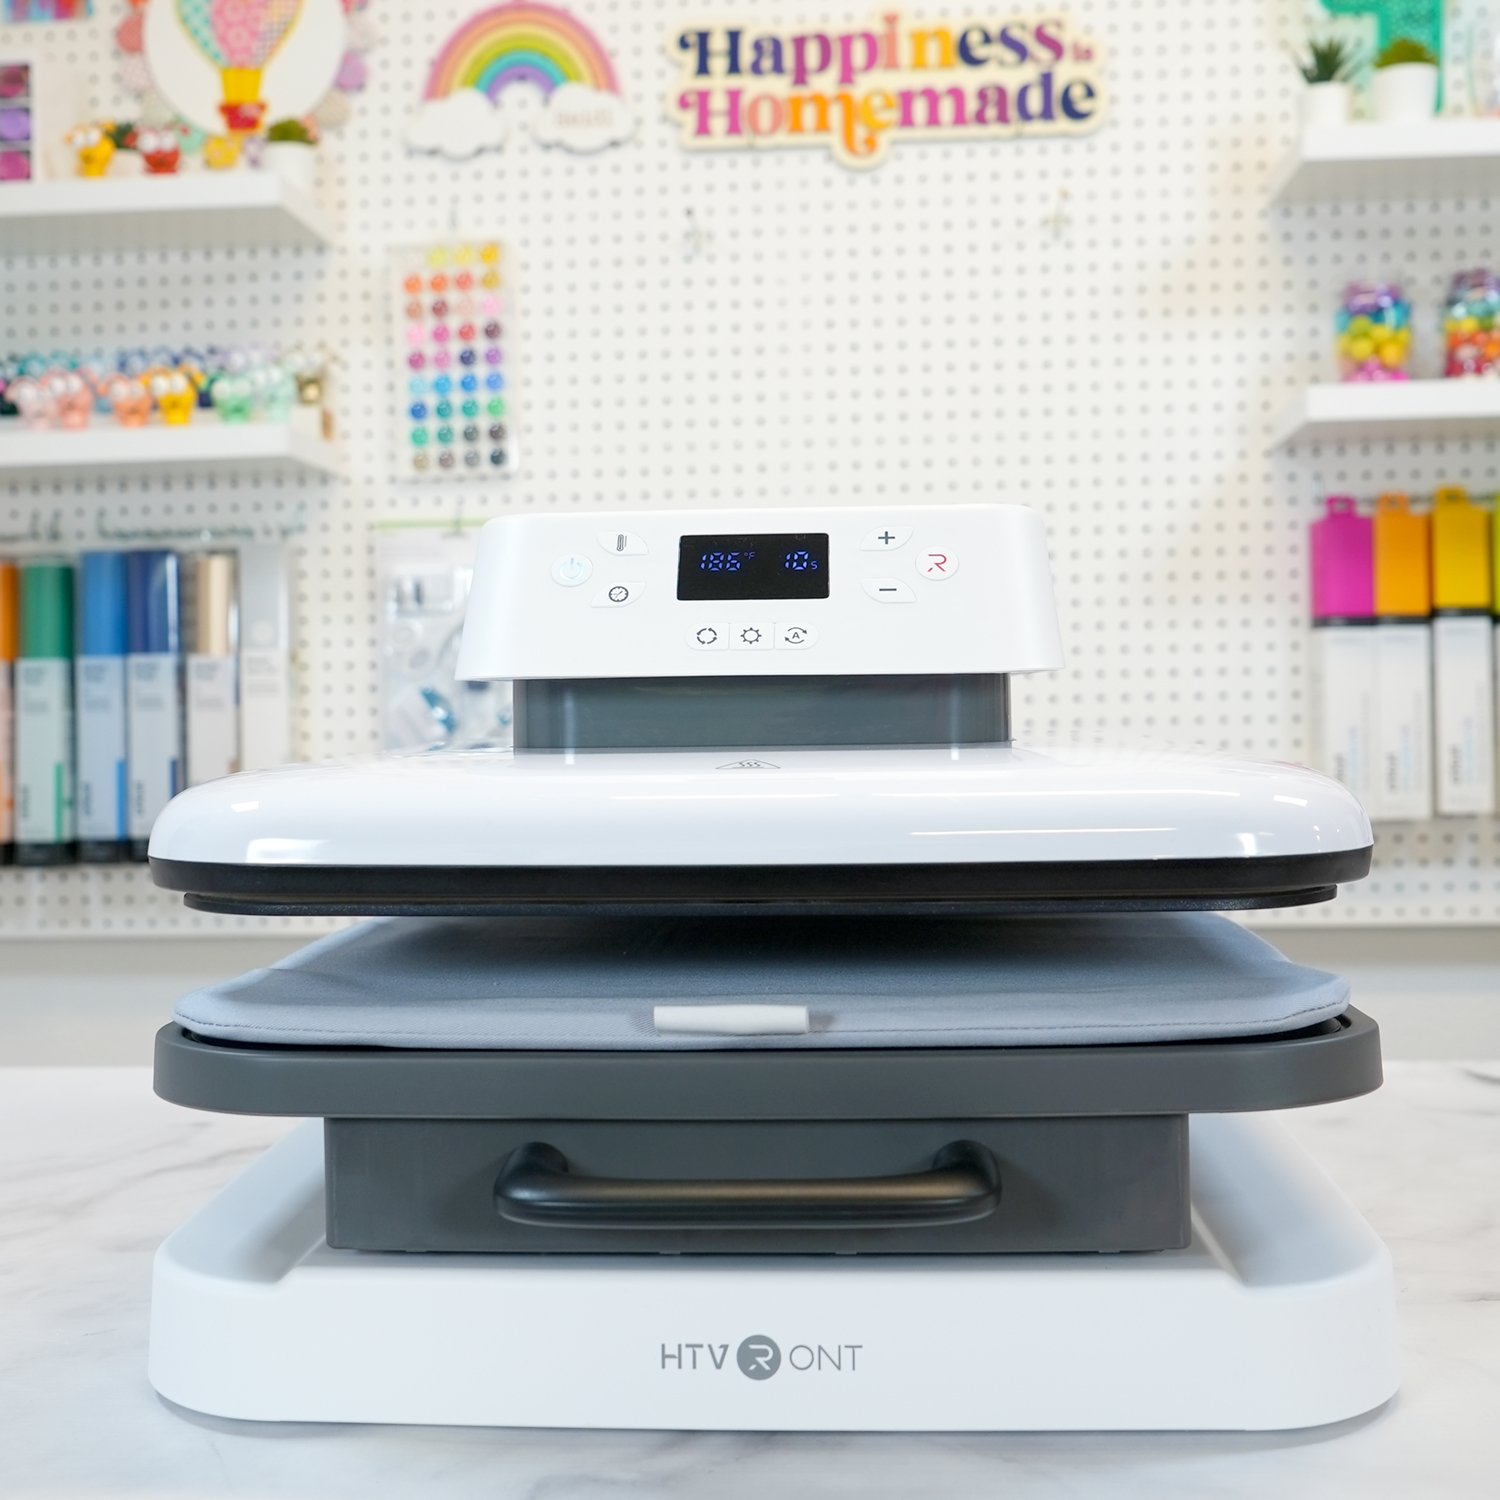 HTV Auto Heat Press on counter in front of colorful pegboard of craft supplies